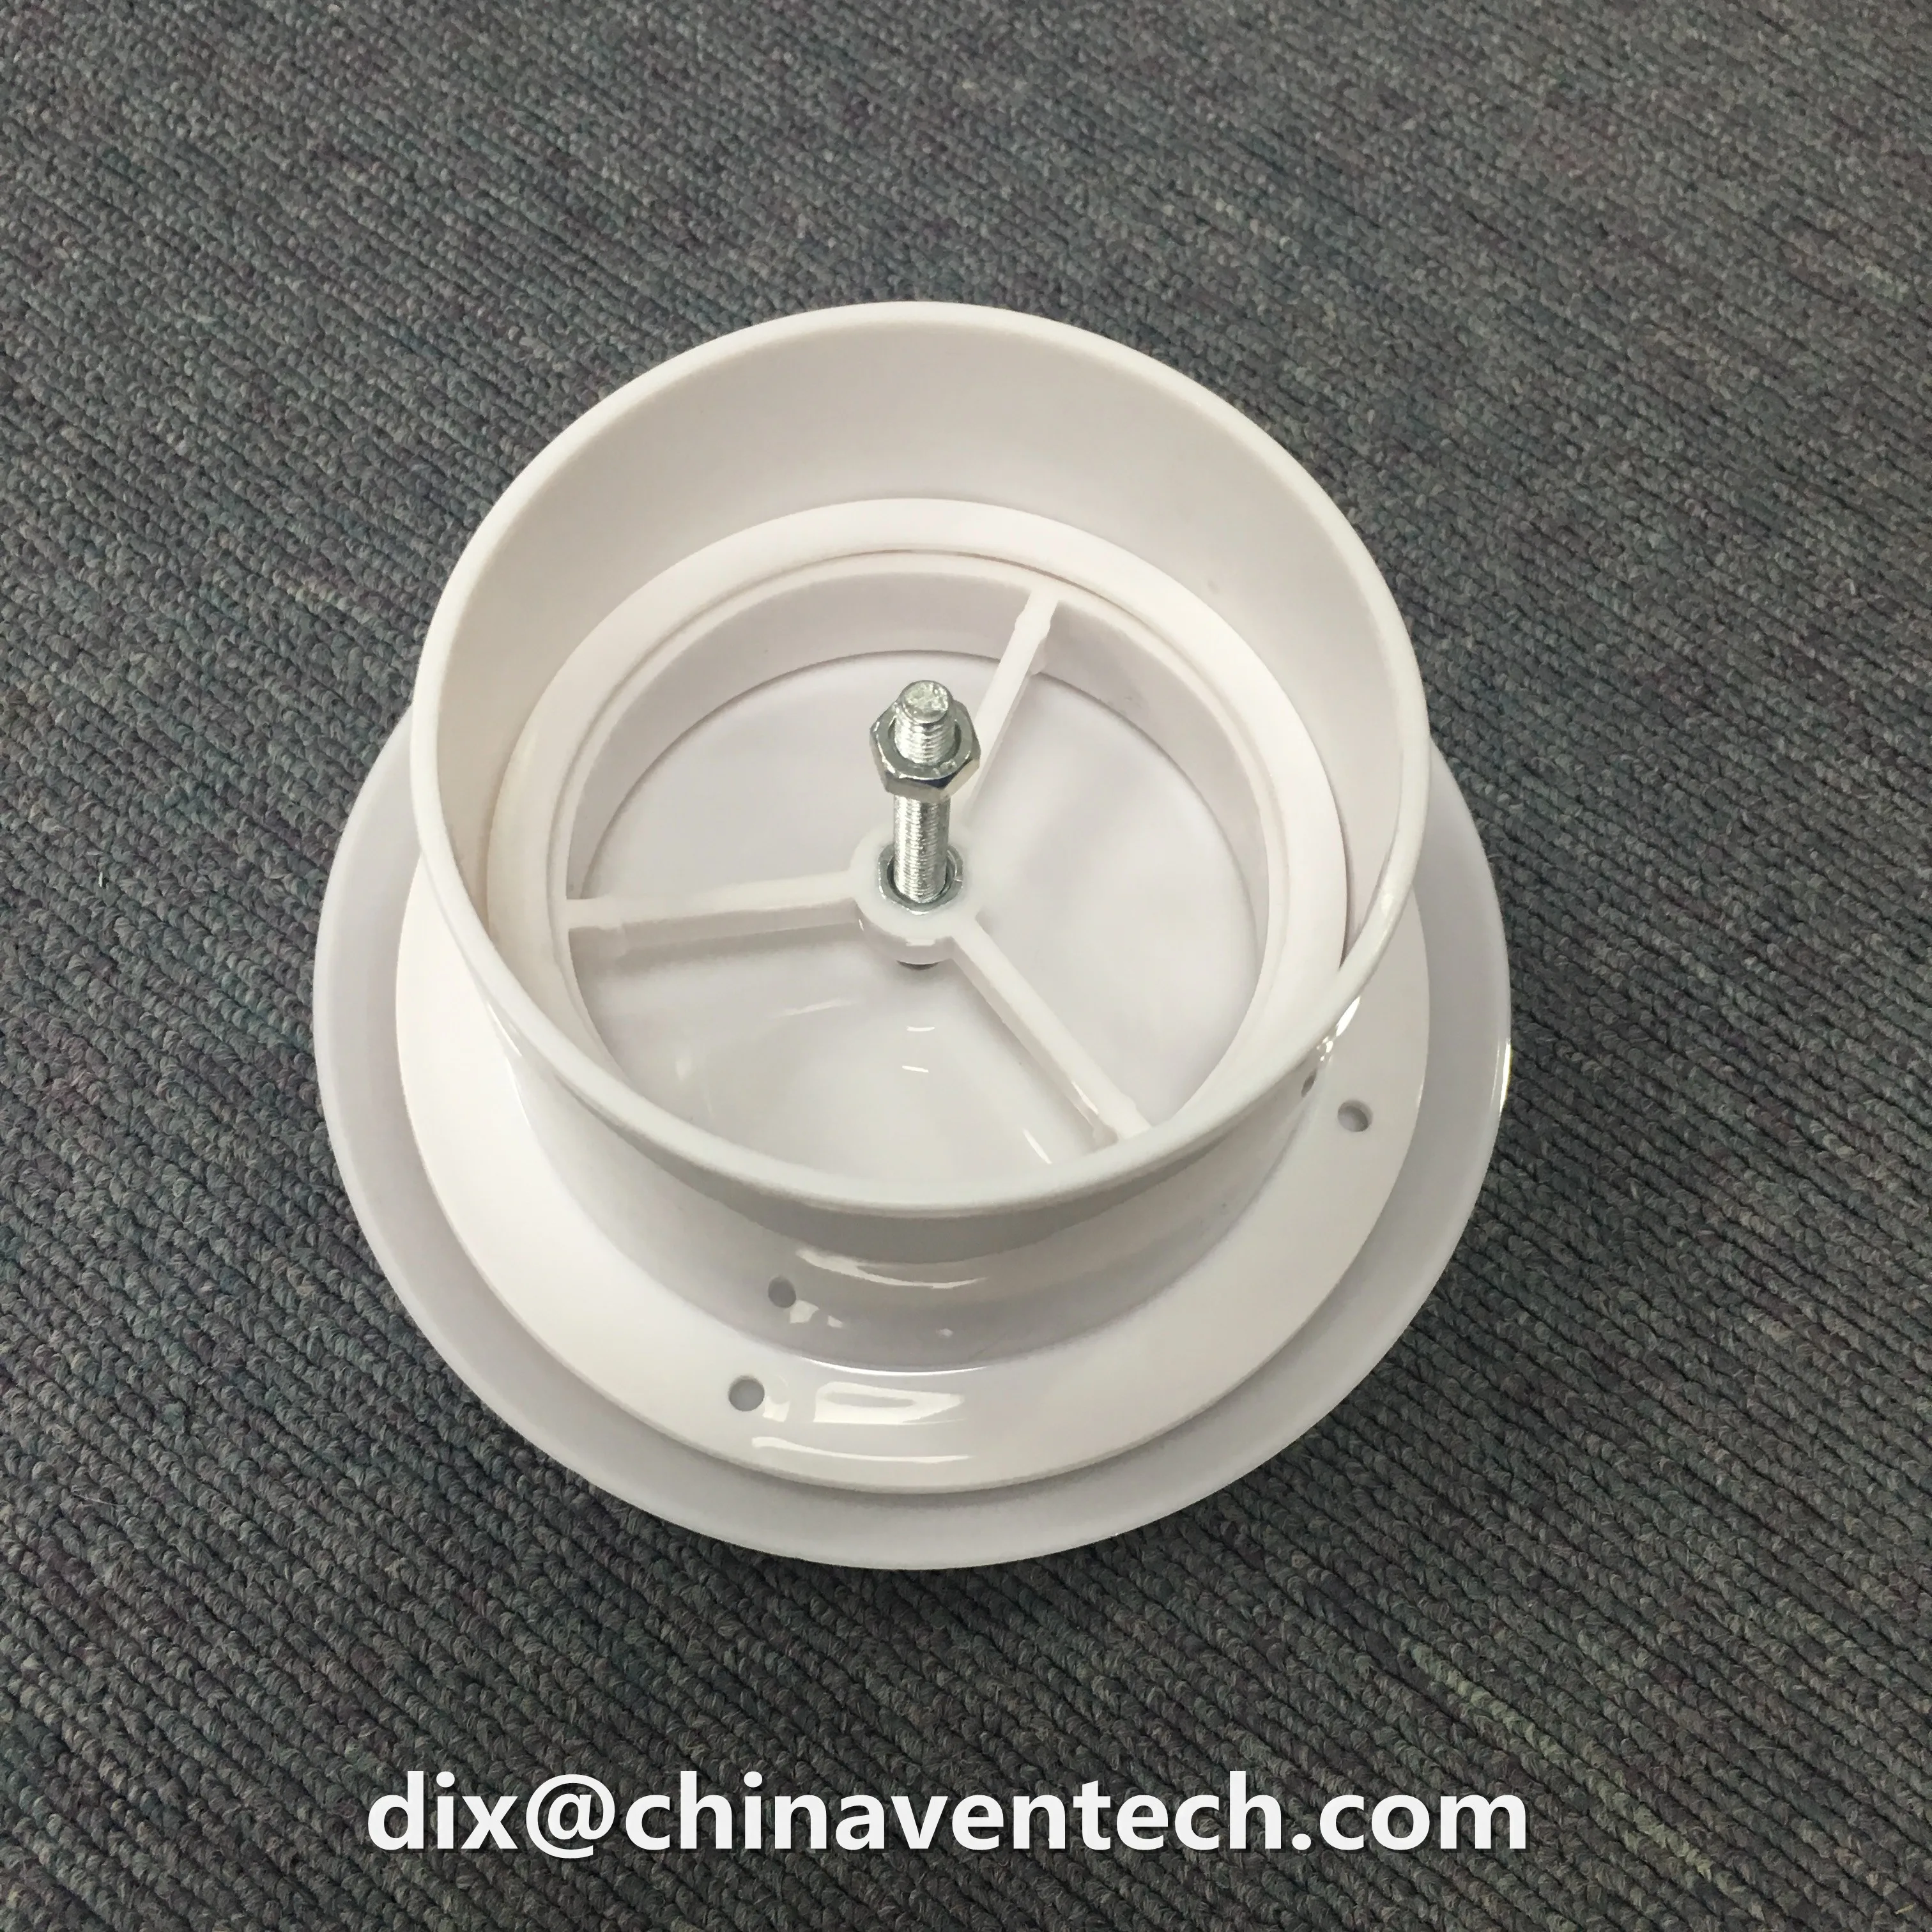 Supply and exhaust plastic air disc valves for ducting